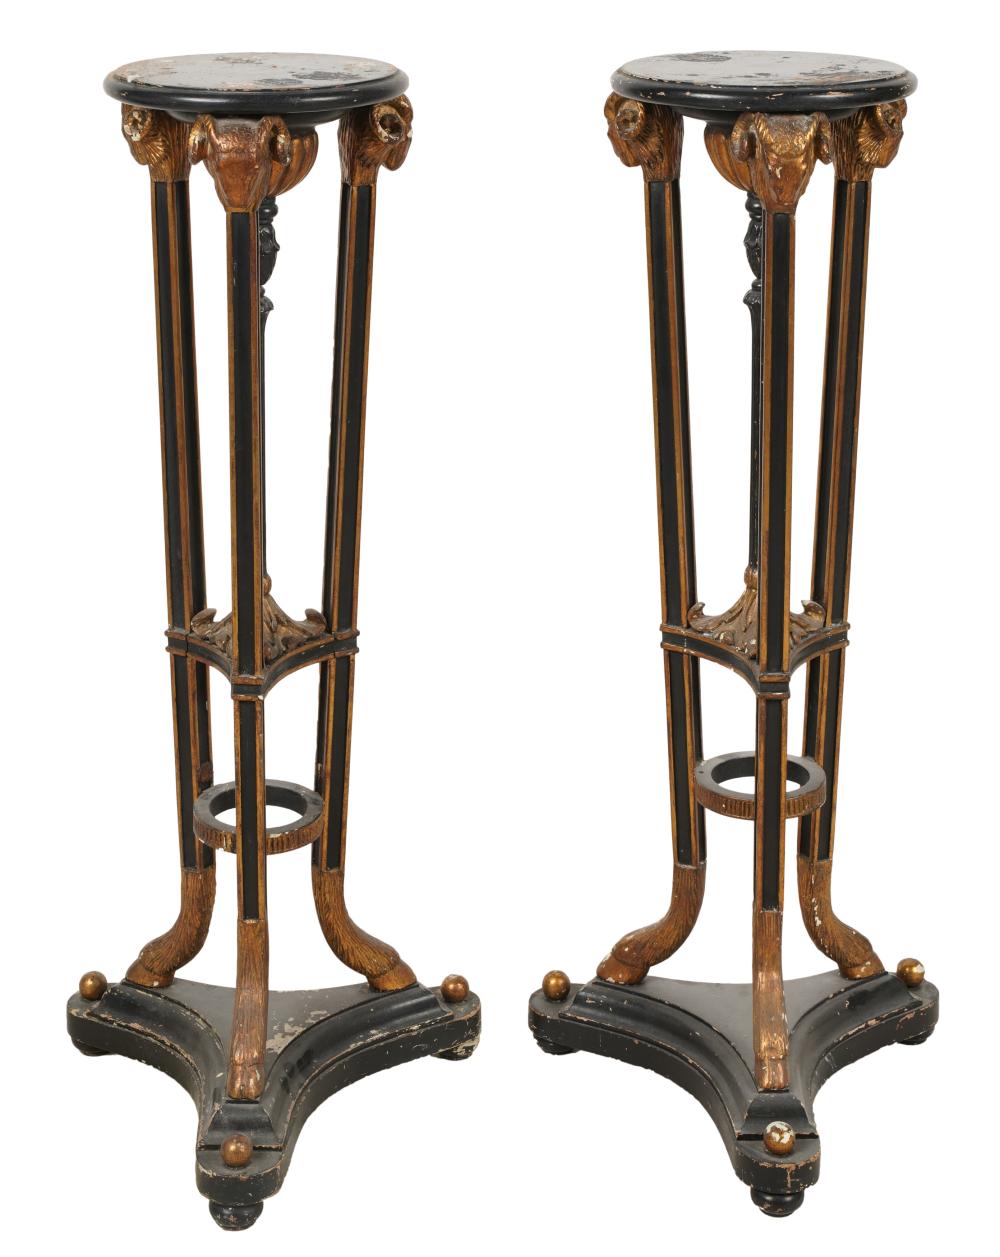 PAIR OF NEOCLASSICAL-STYLE GILT AND